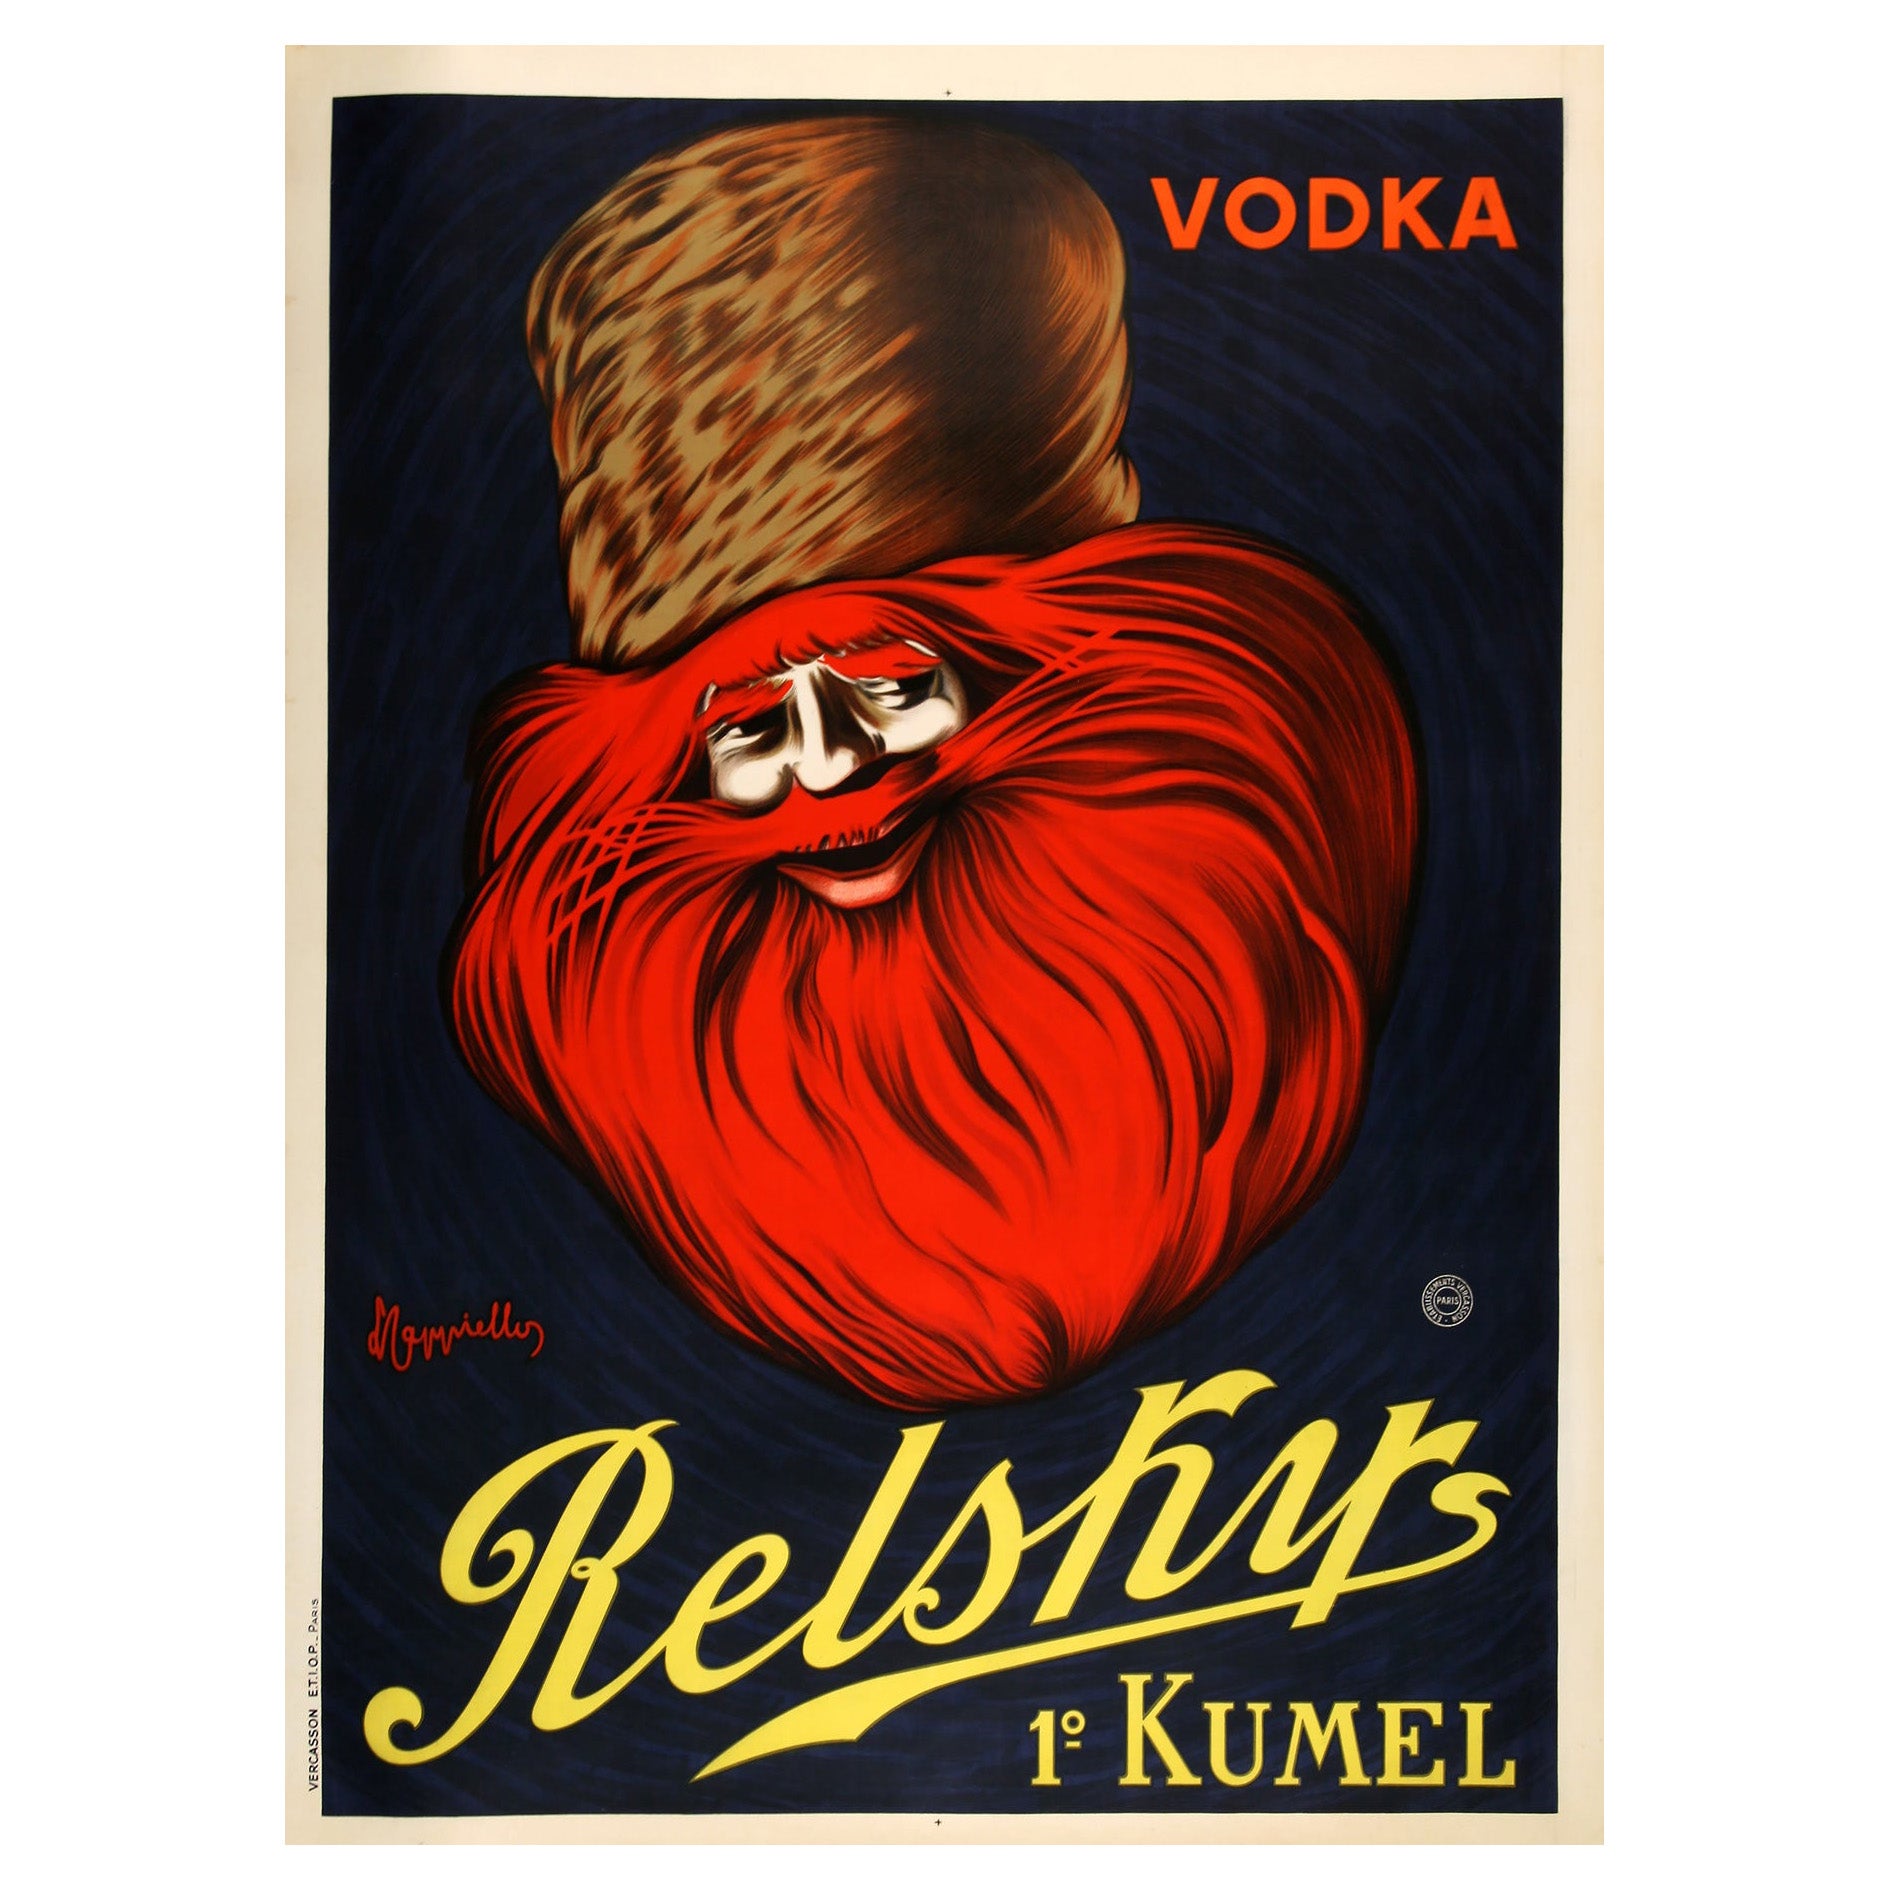 RELSKY, C1925 Vintage French Vodka Alcohol Advertising Poster, CAPPIELLO For Sale